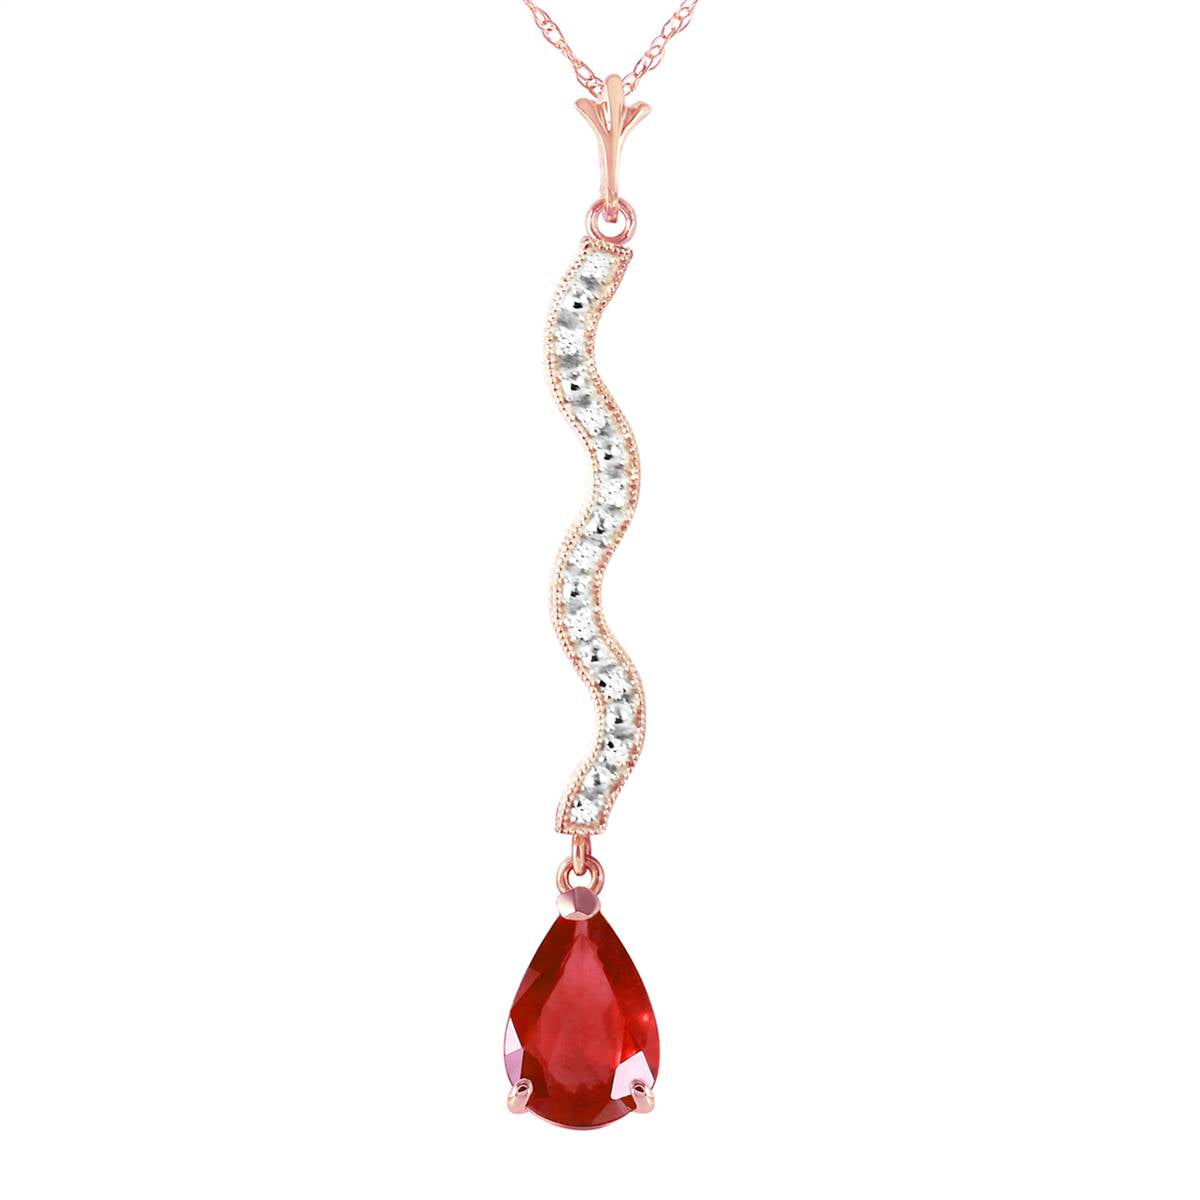 14K Solid Rose Gold Diamond & Ruby Necklace Jewelry